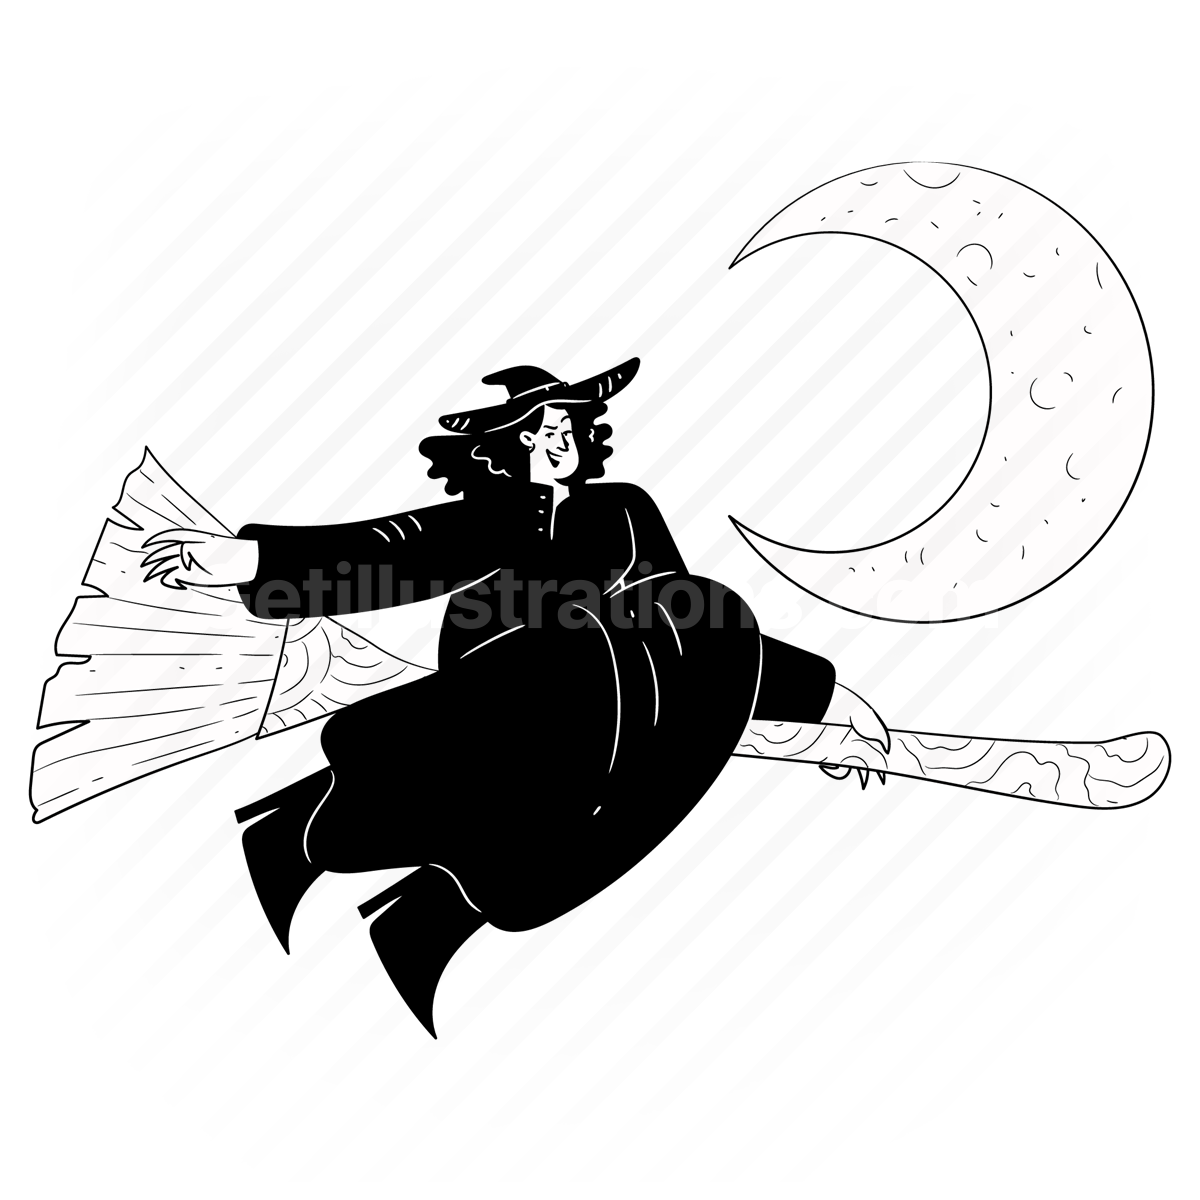 witch, magic, magical, spooky, scary, flying, broomstick, horror, halloween